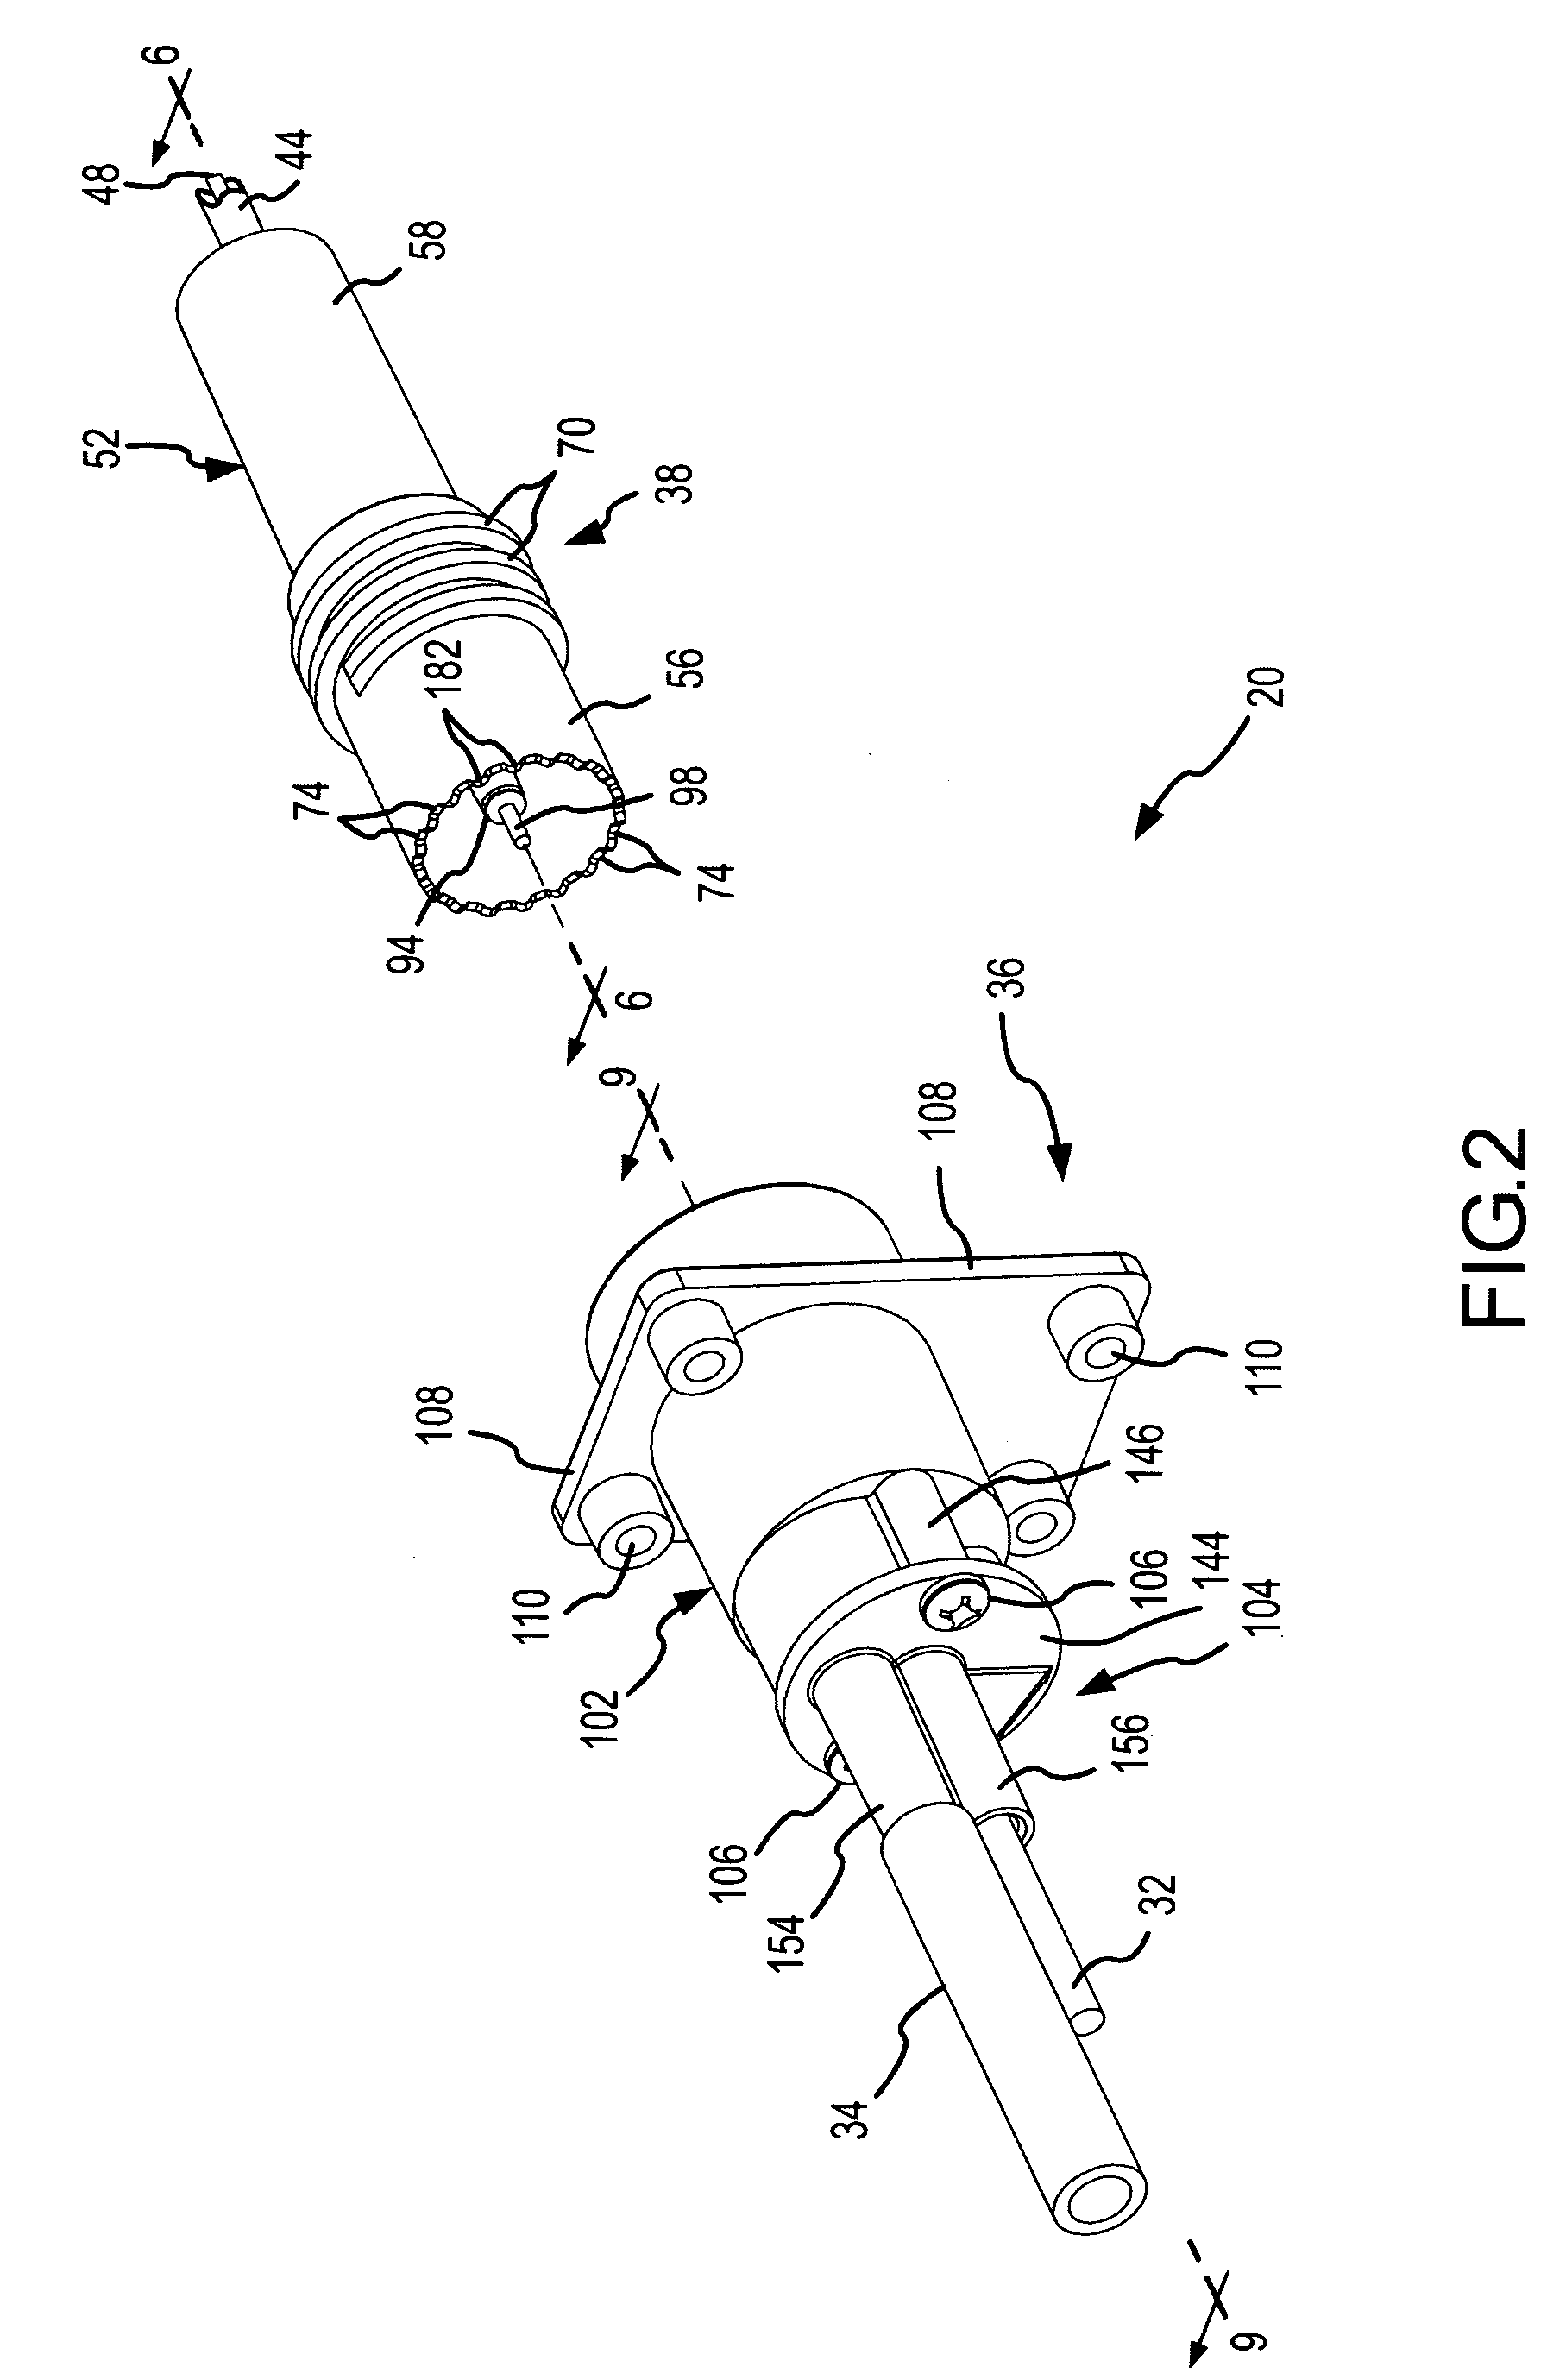 Gas-assisted electrosurgical accessory connector and method with improved gas sealing and biasing for maintaining a gas tight seal